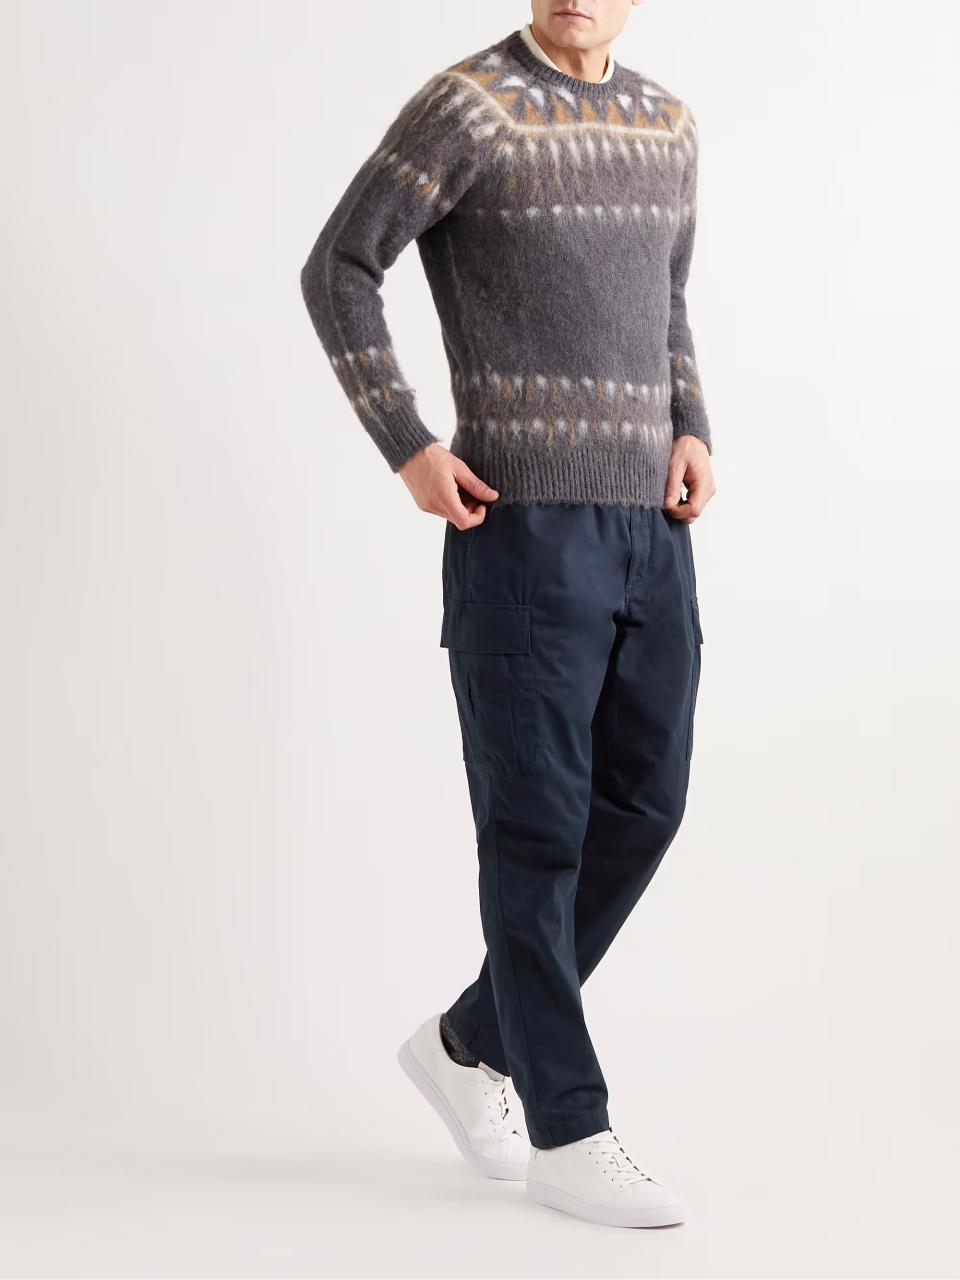 Polo Ralph Lauren Blue cargo pants worn with a fair isle sweater and sneakers